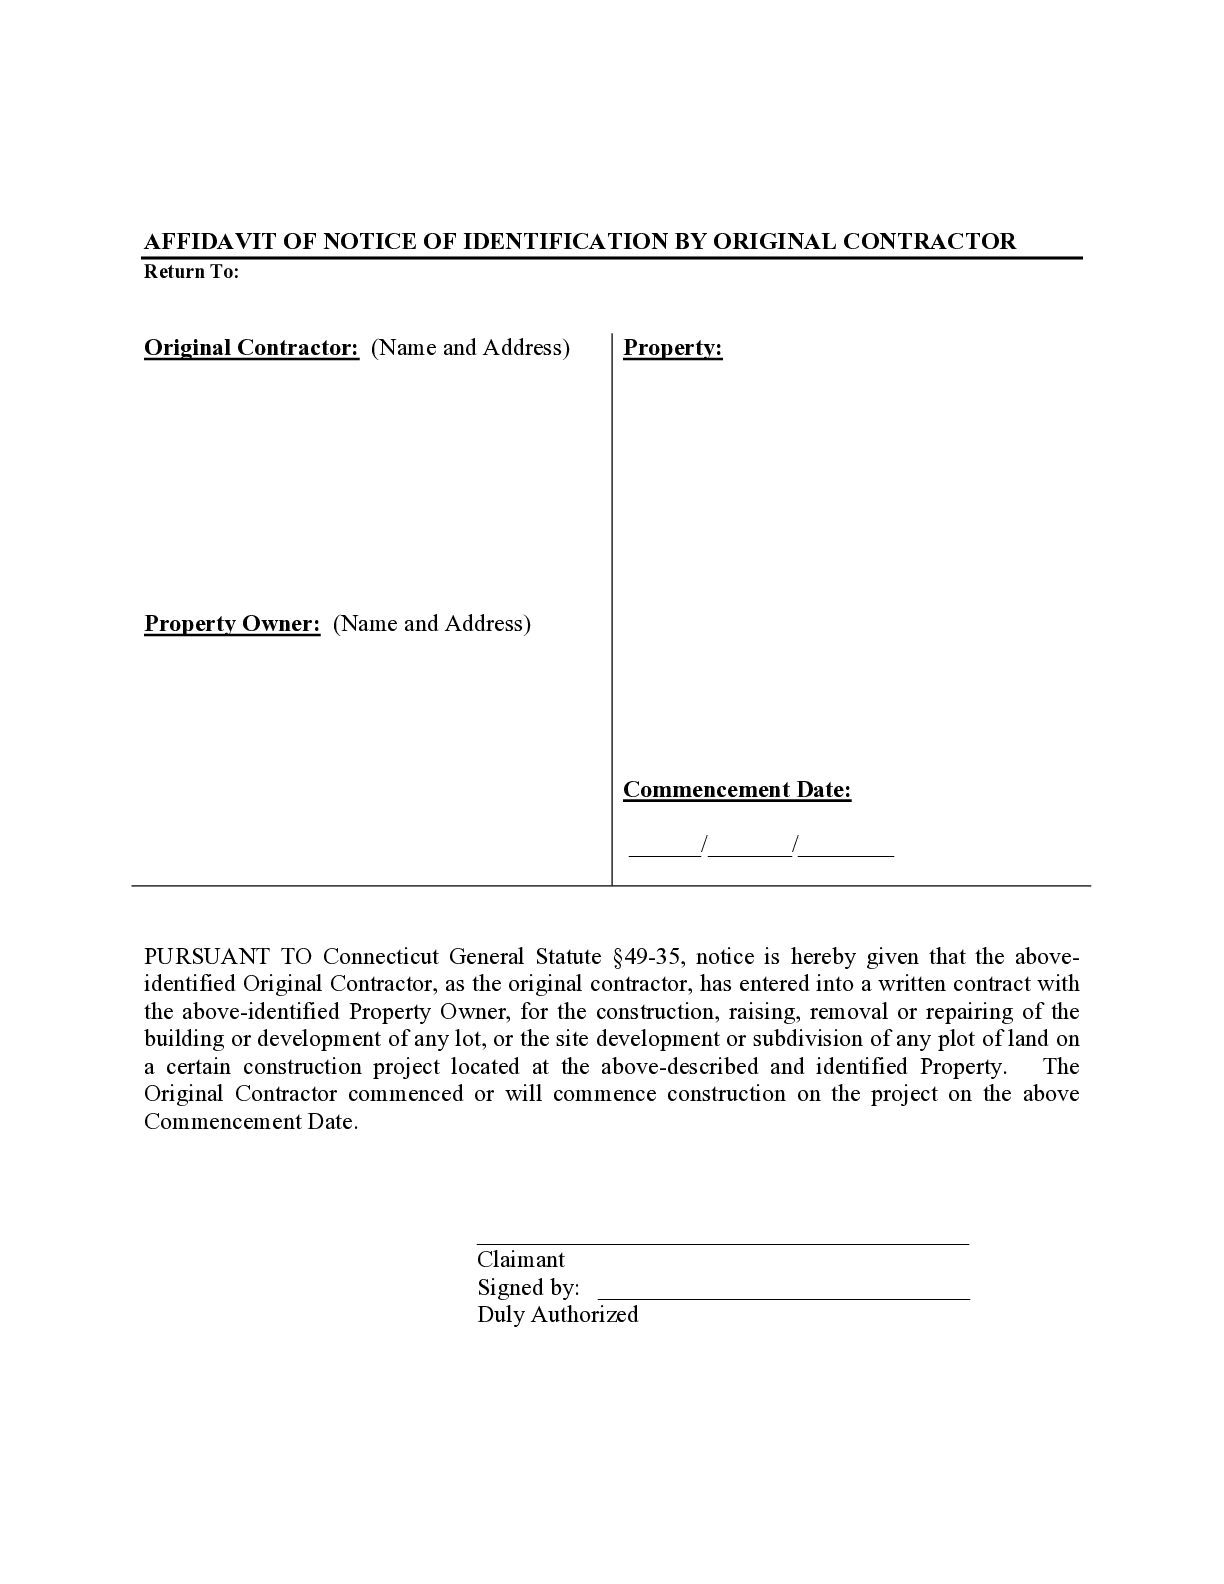 Connecticut Contractor Affidavit Form - free from